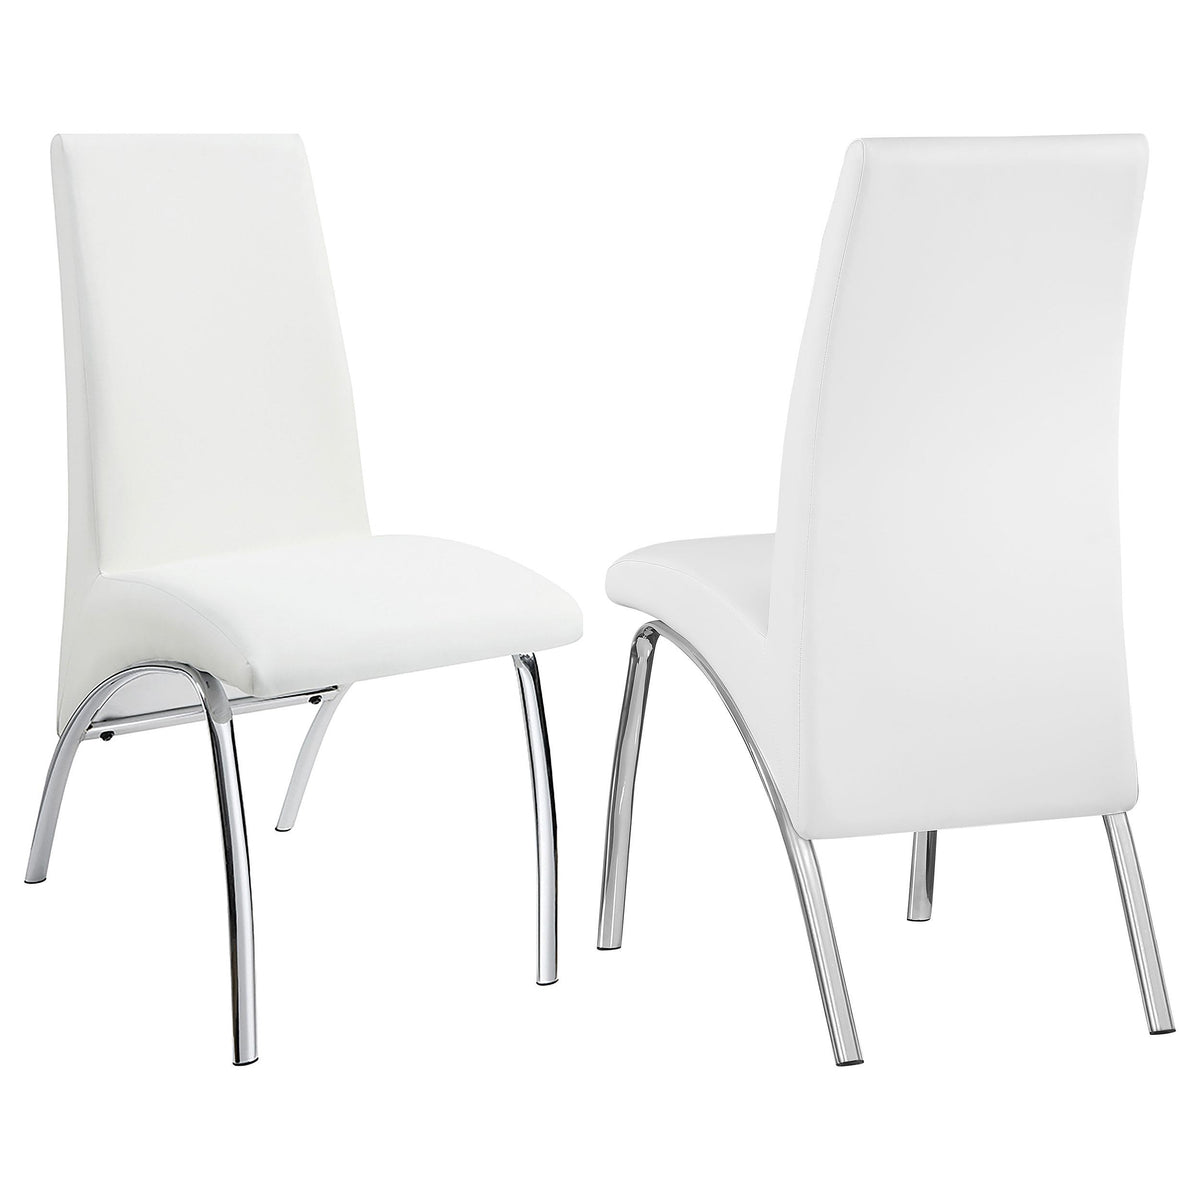 Bishop Upholstered Side Chairs White and Chrome (Set of 2) Bishop Upholstered Side Chairs White and Chrome (Set of 2) Half Price Furniture